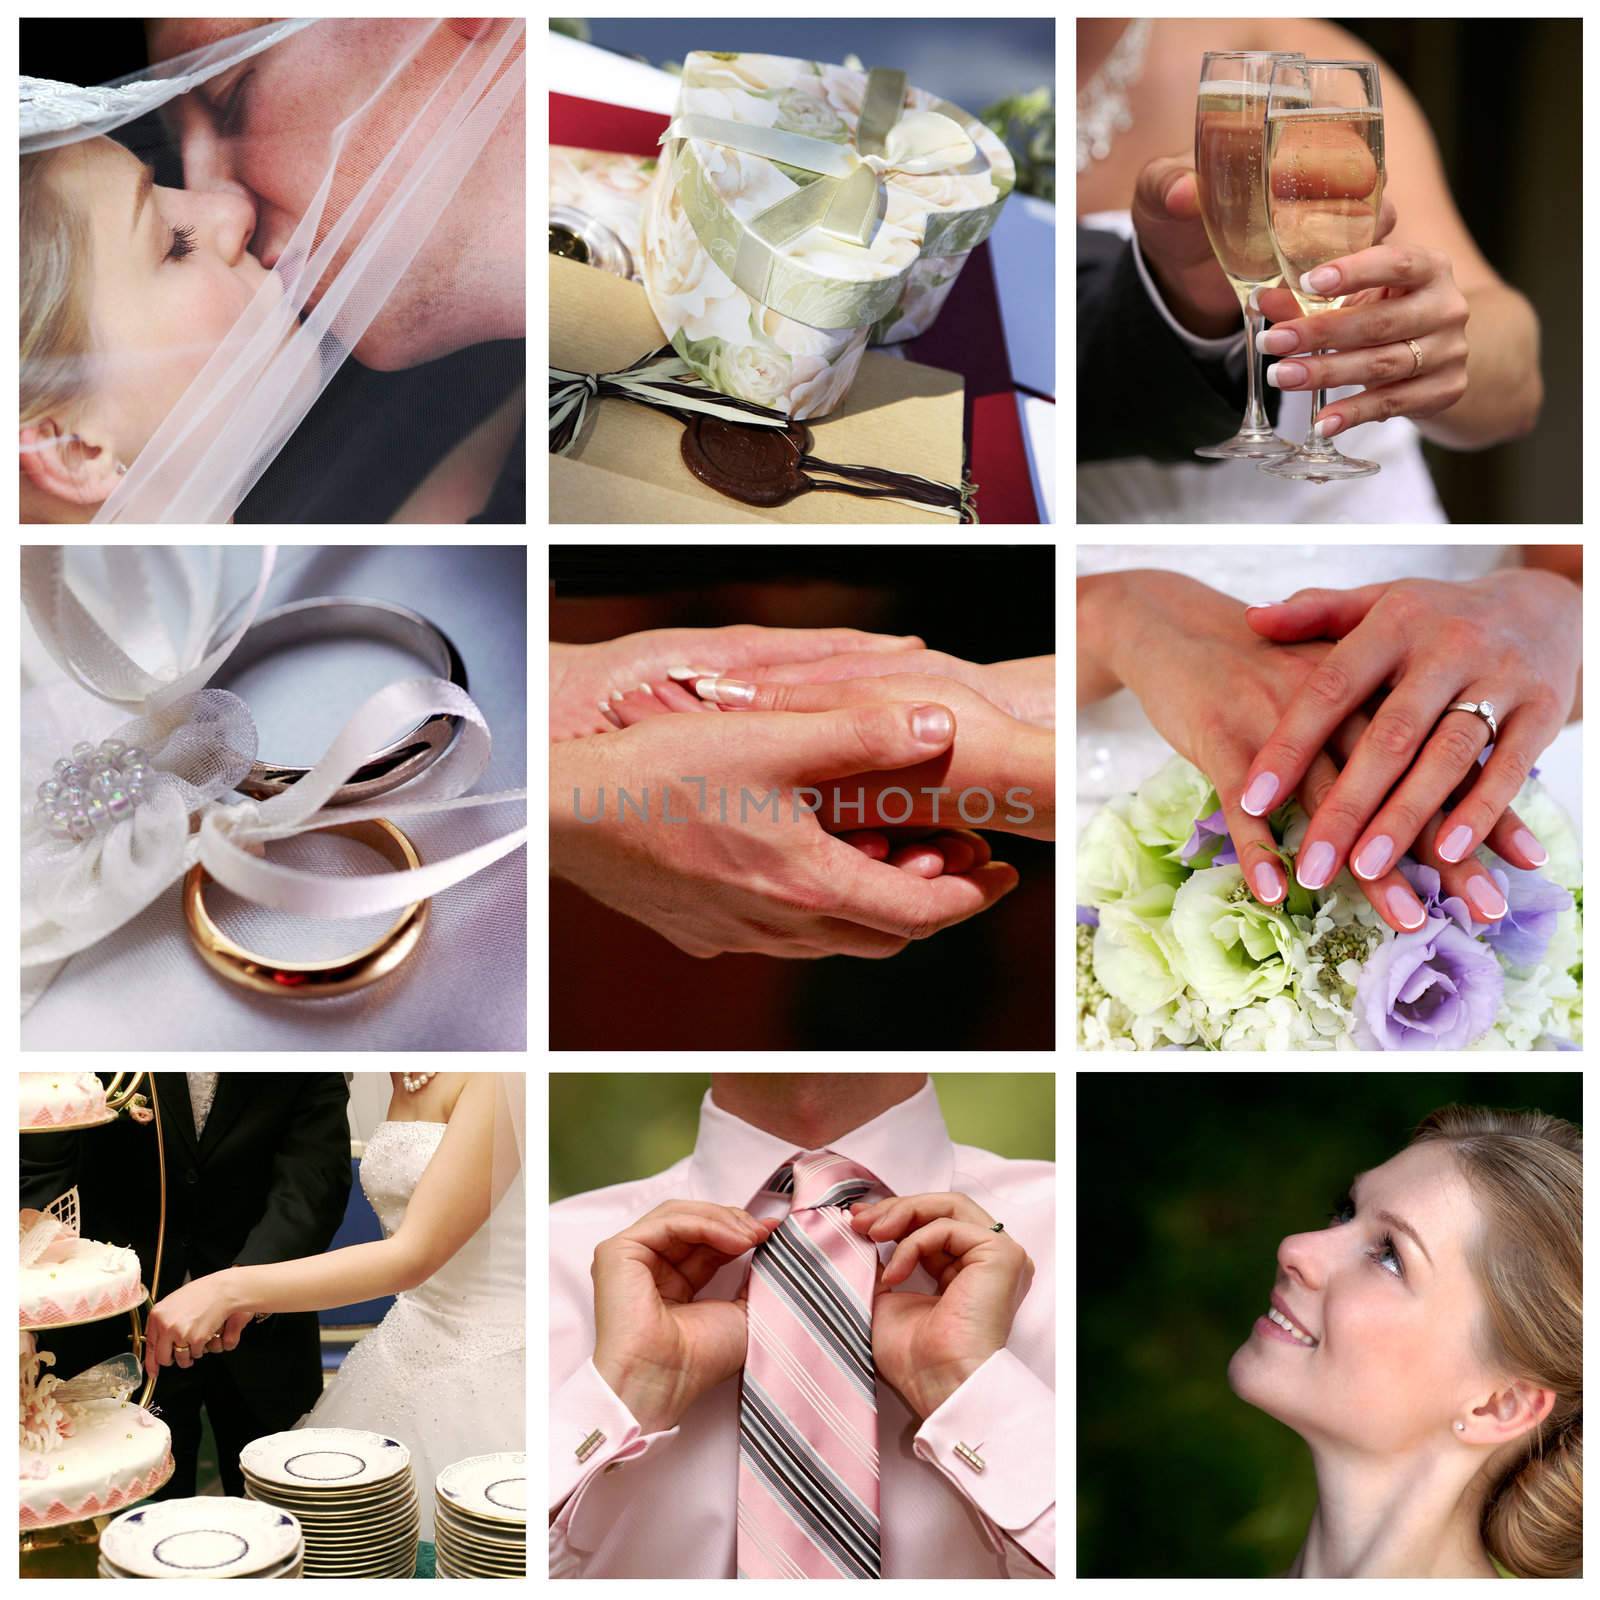 Collage of nine wedding photos by friday